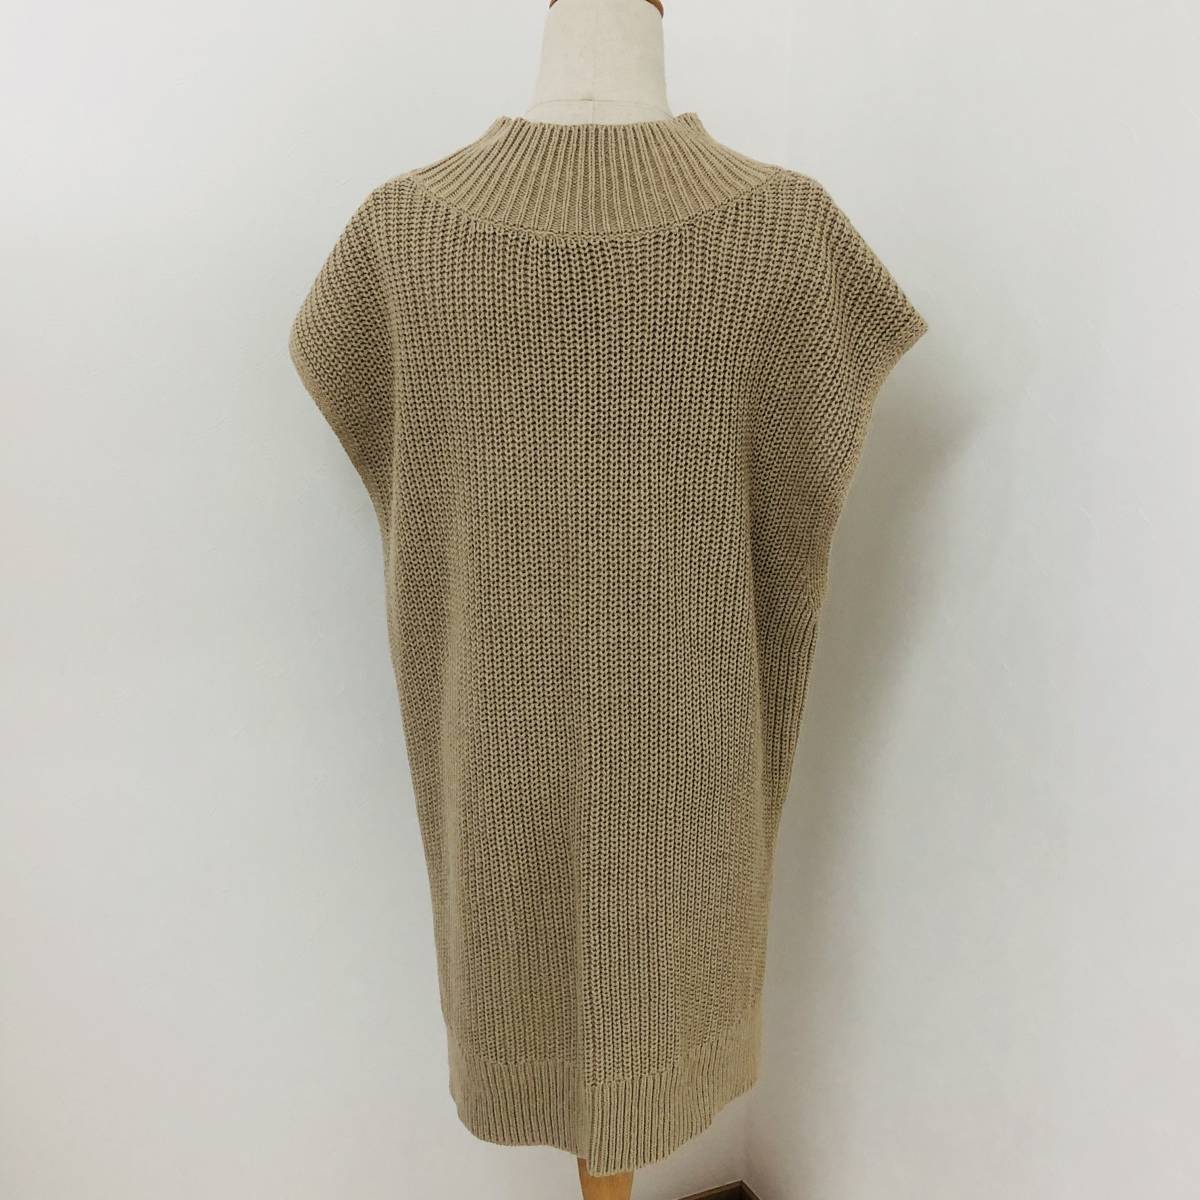 a01106 ultimate beautiful goods NICE CLAUP Nice Claup sweater 1 minute sleeve cotton . side slit cable braided beige simple tei Lee casual 